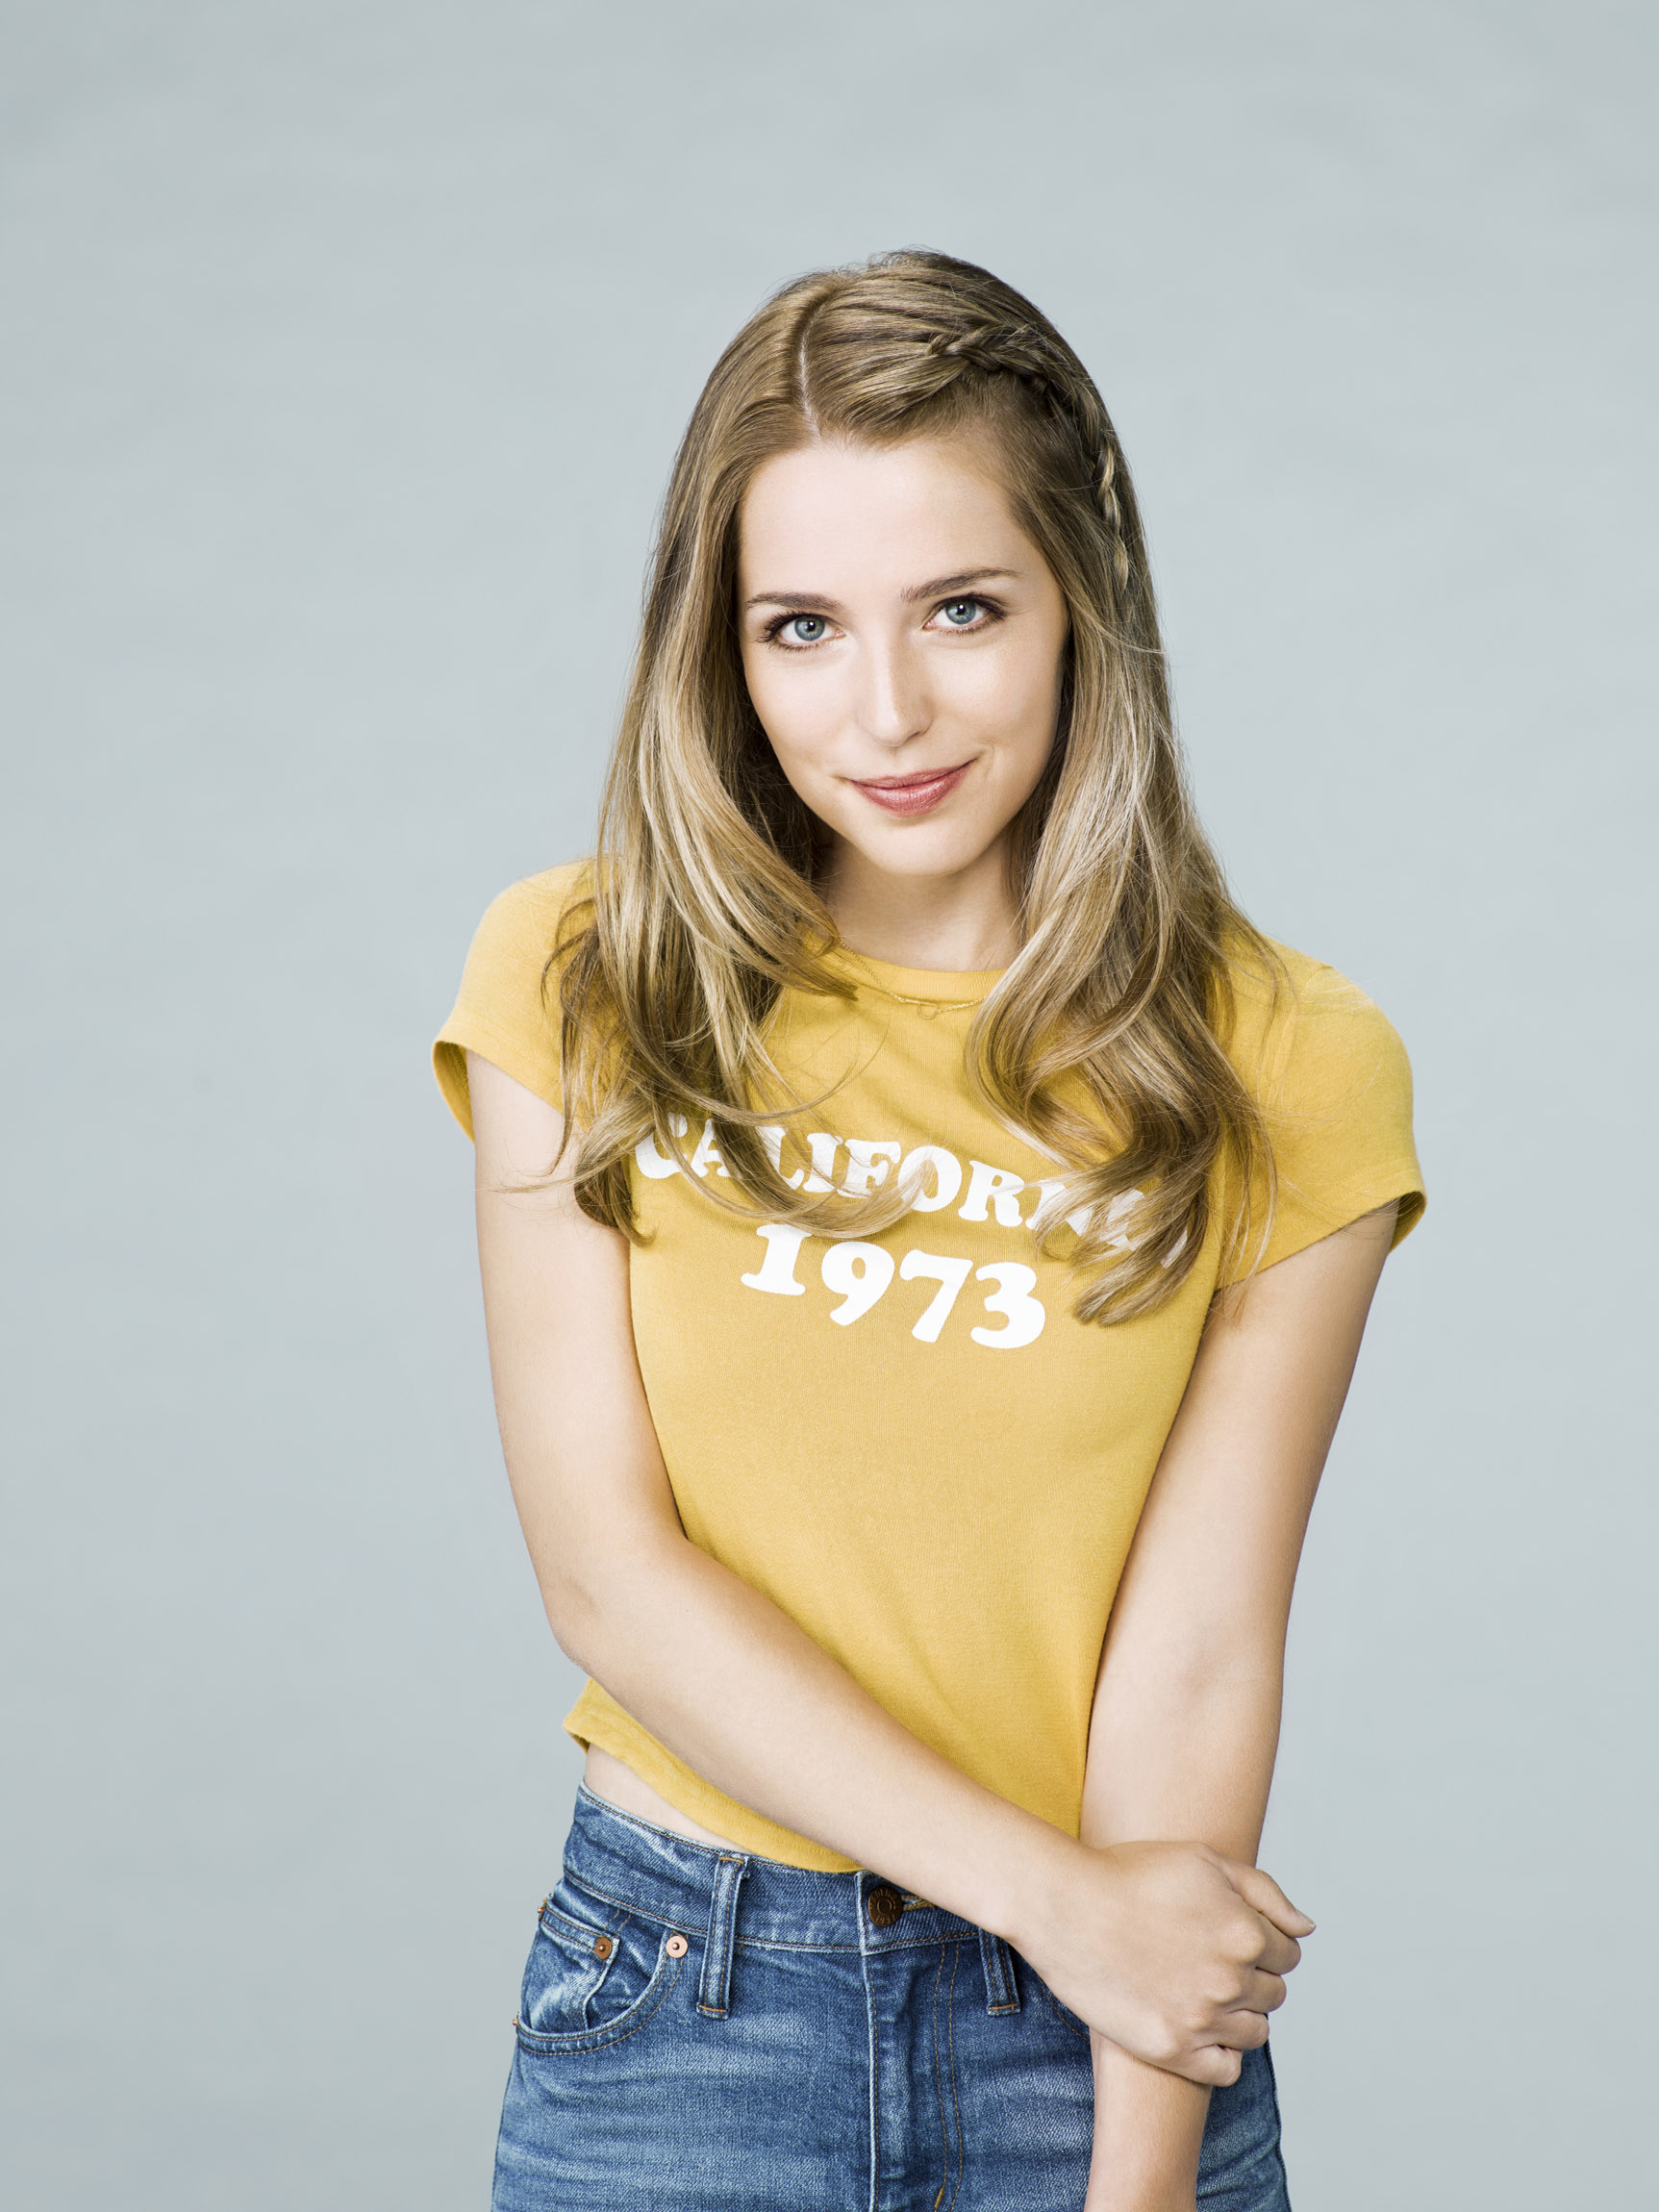 Jessica Rothe Women Actress Blue Eyes Long Hair Simple Background 1725x2300